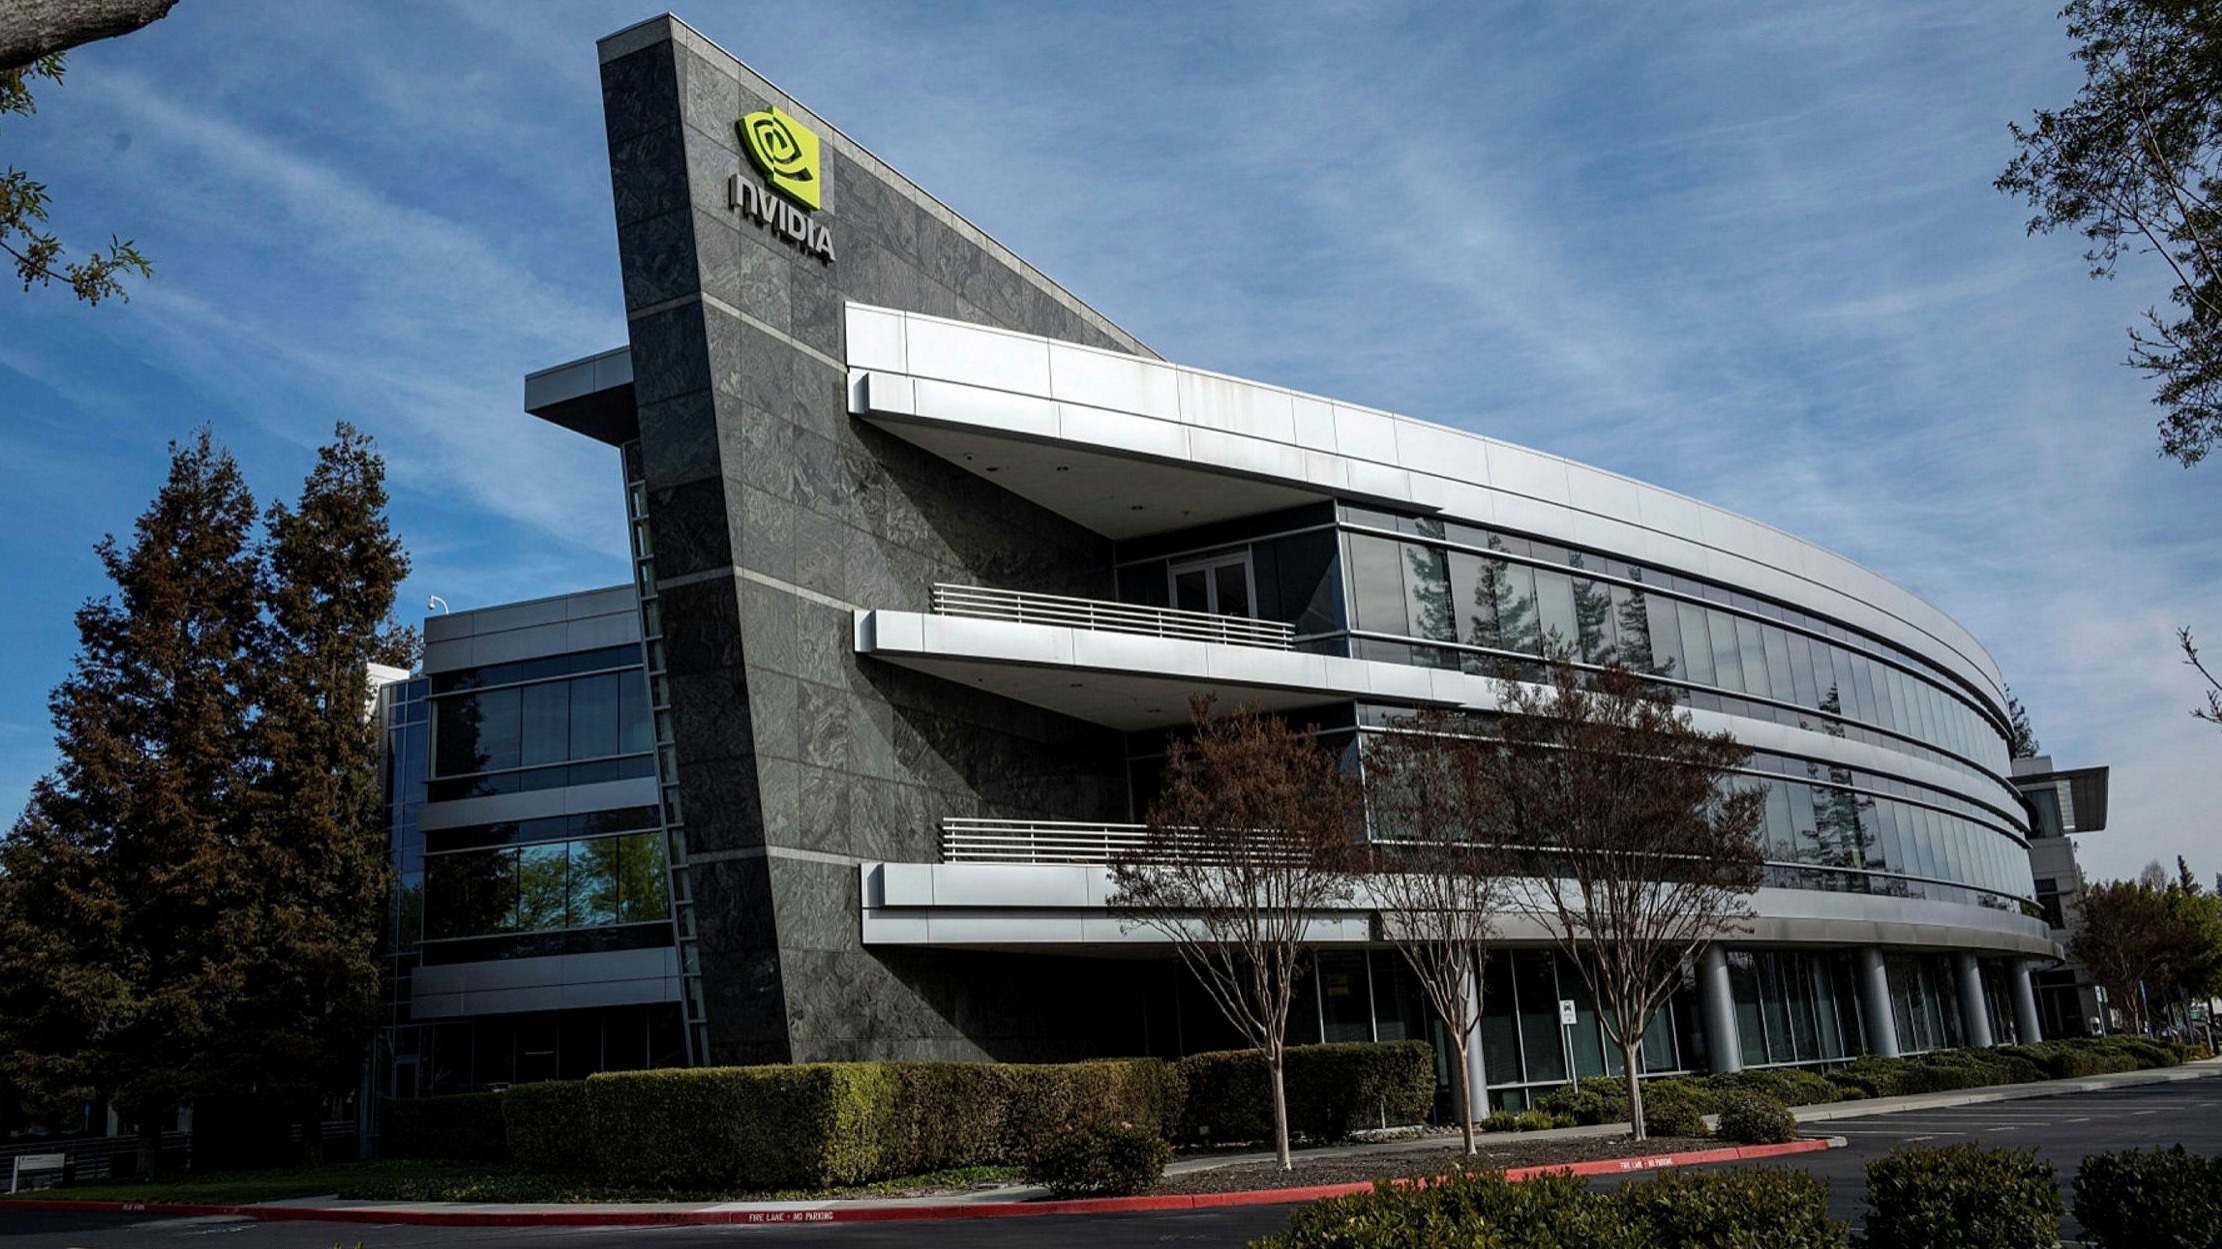 Nvidia announces plan to make CPU chips | Financial Times